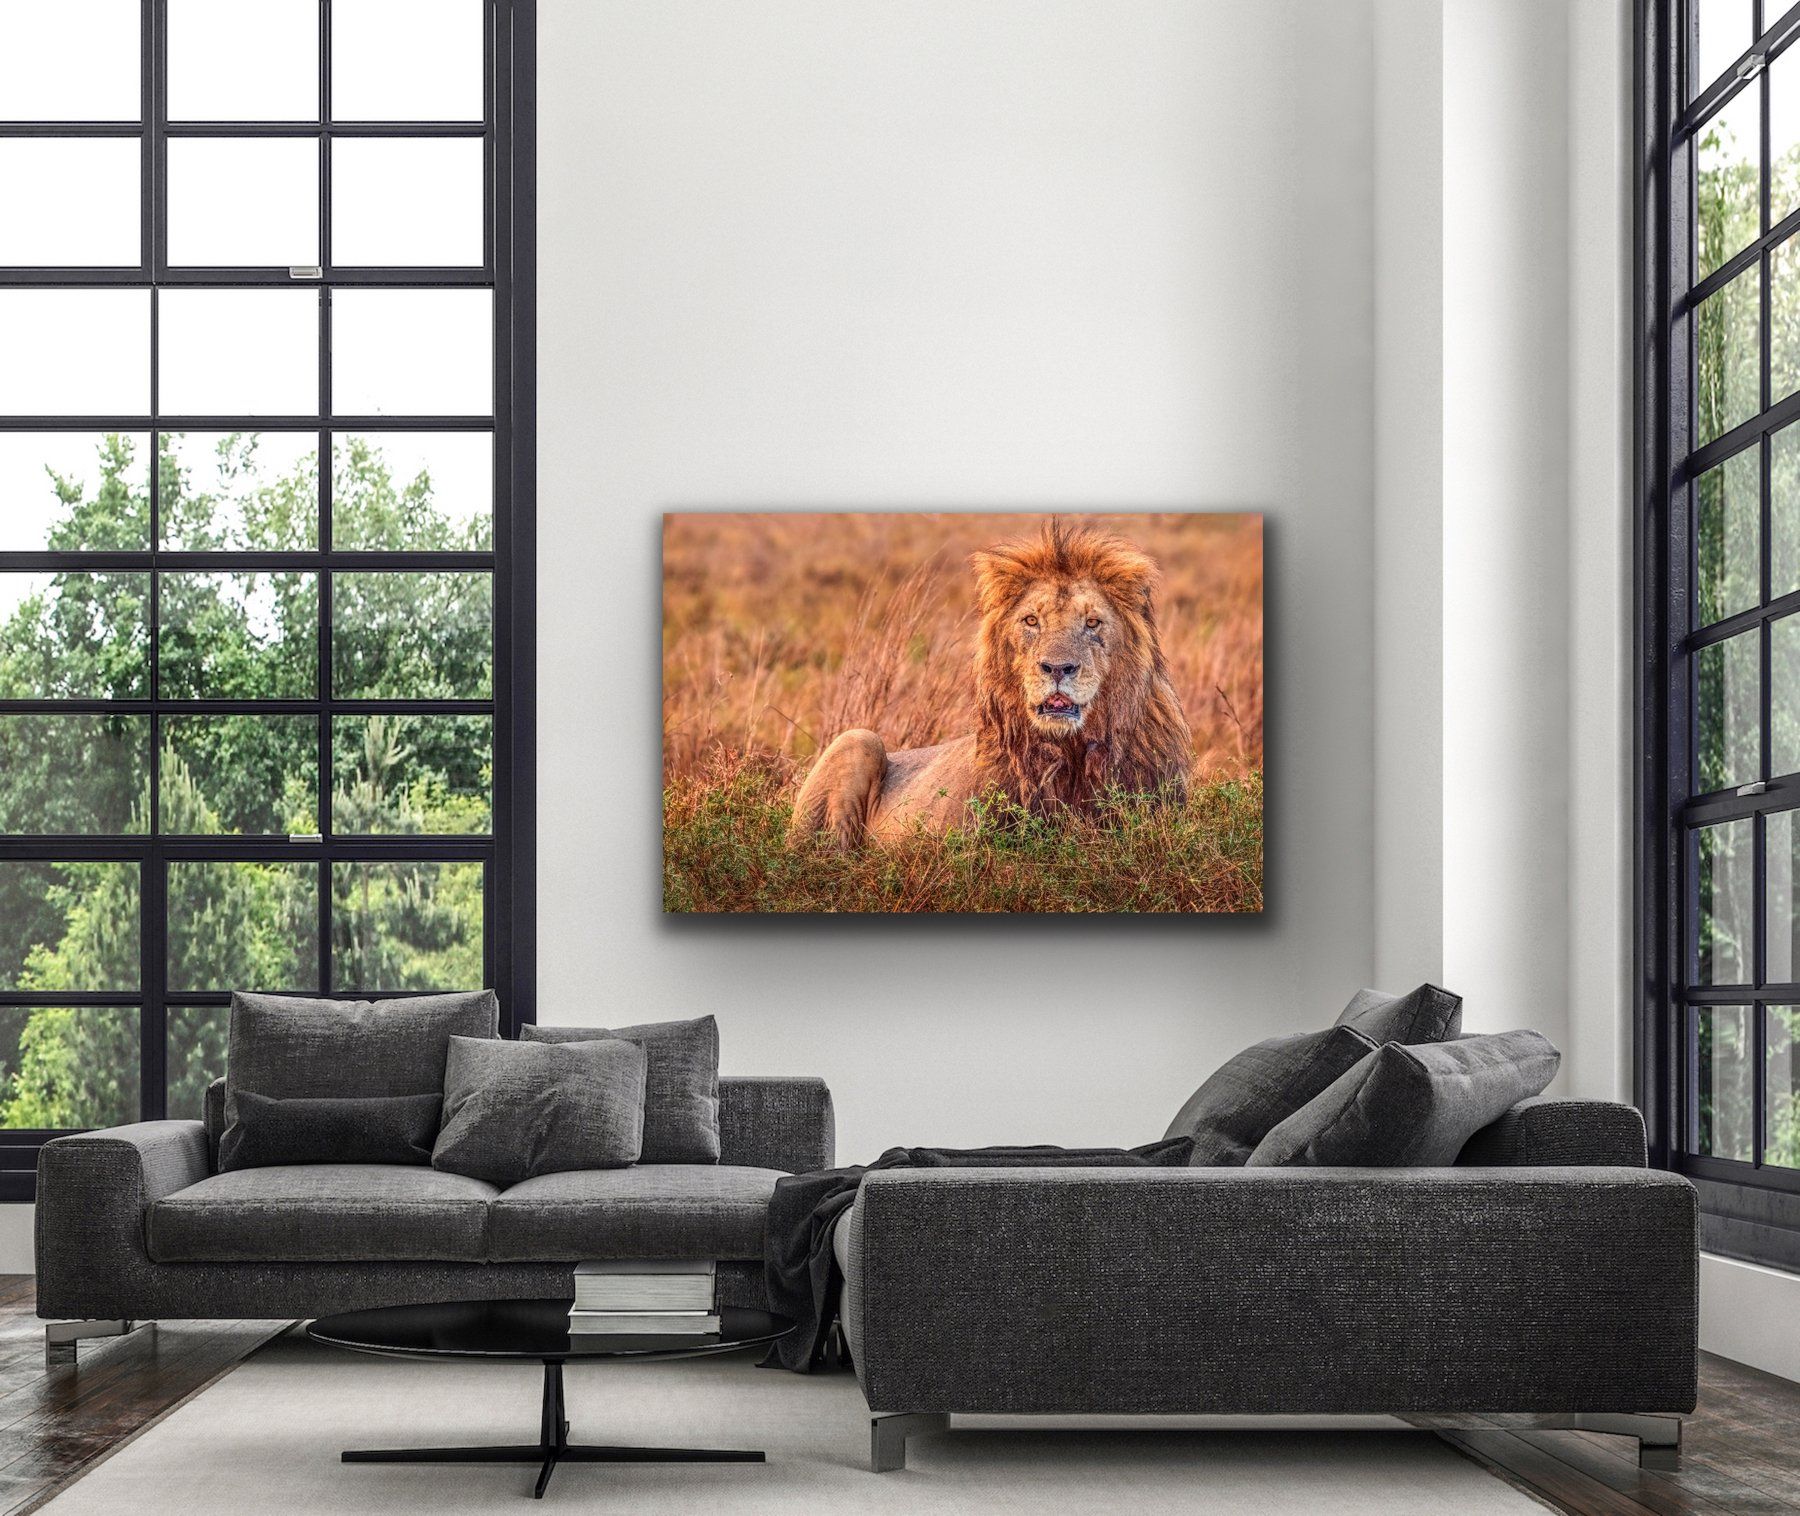 An example of image # Lion S BKT0604 on a wall in a modern home